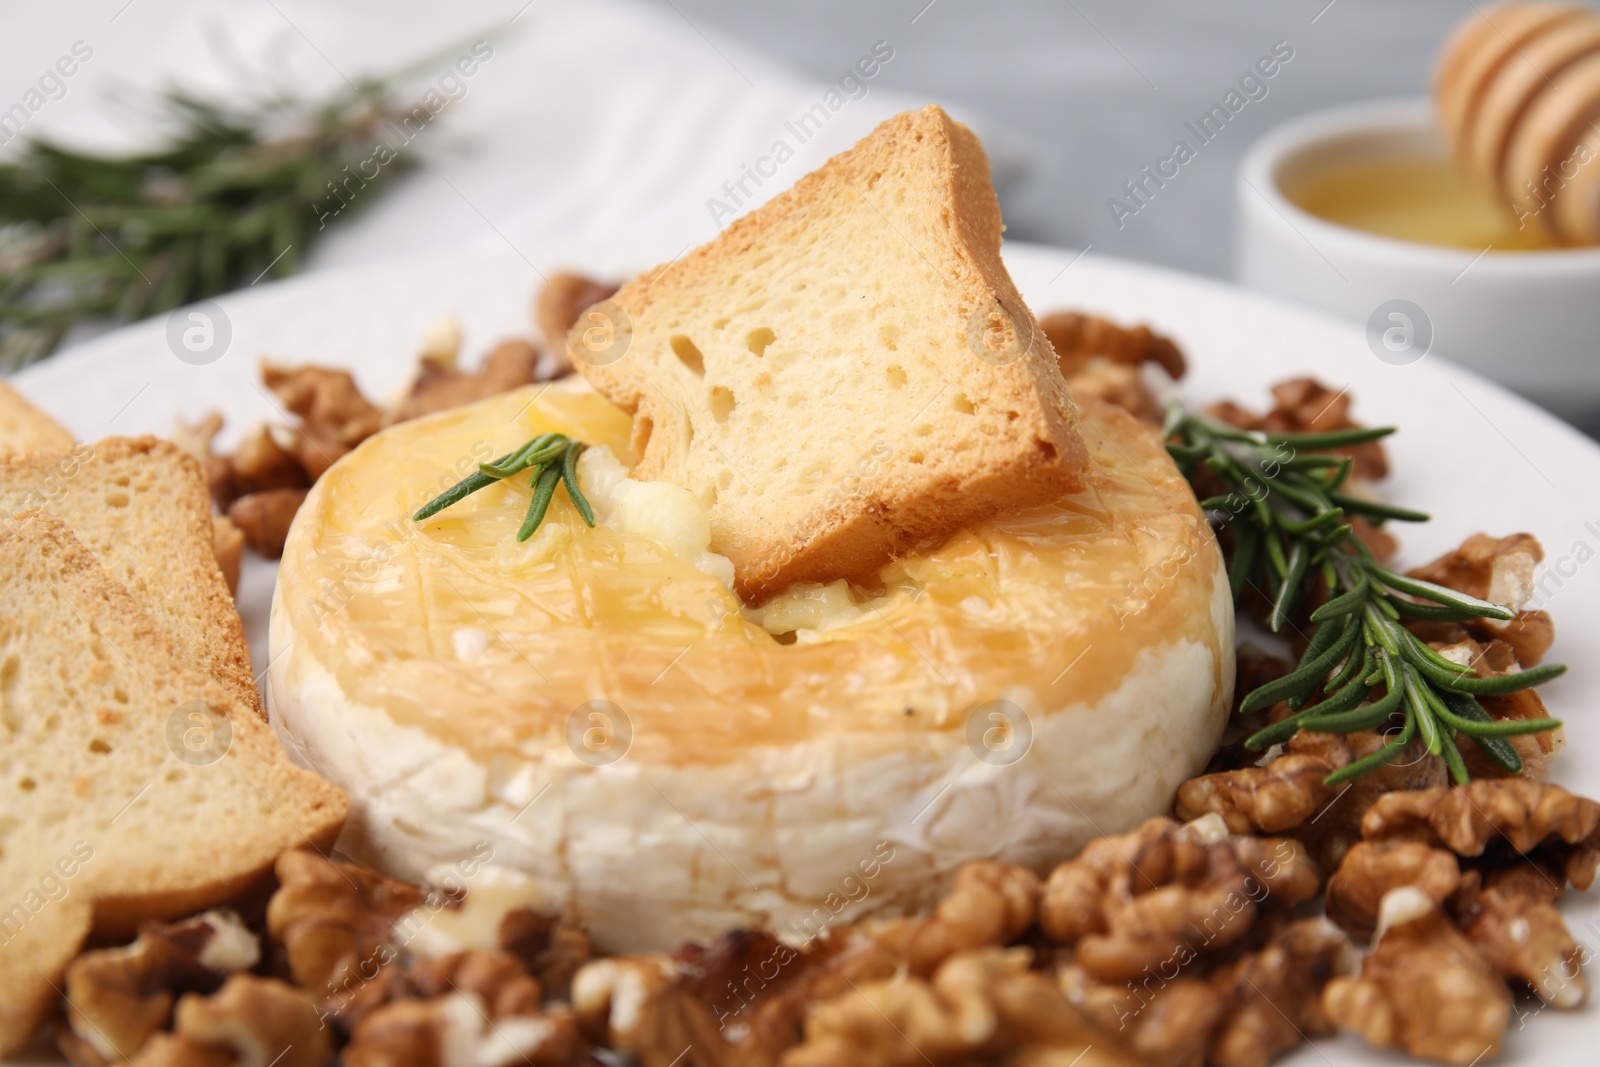 Photo of Tasty baked camembert, croutons, walnuts and rosemary on table, closeup